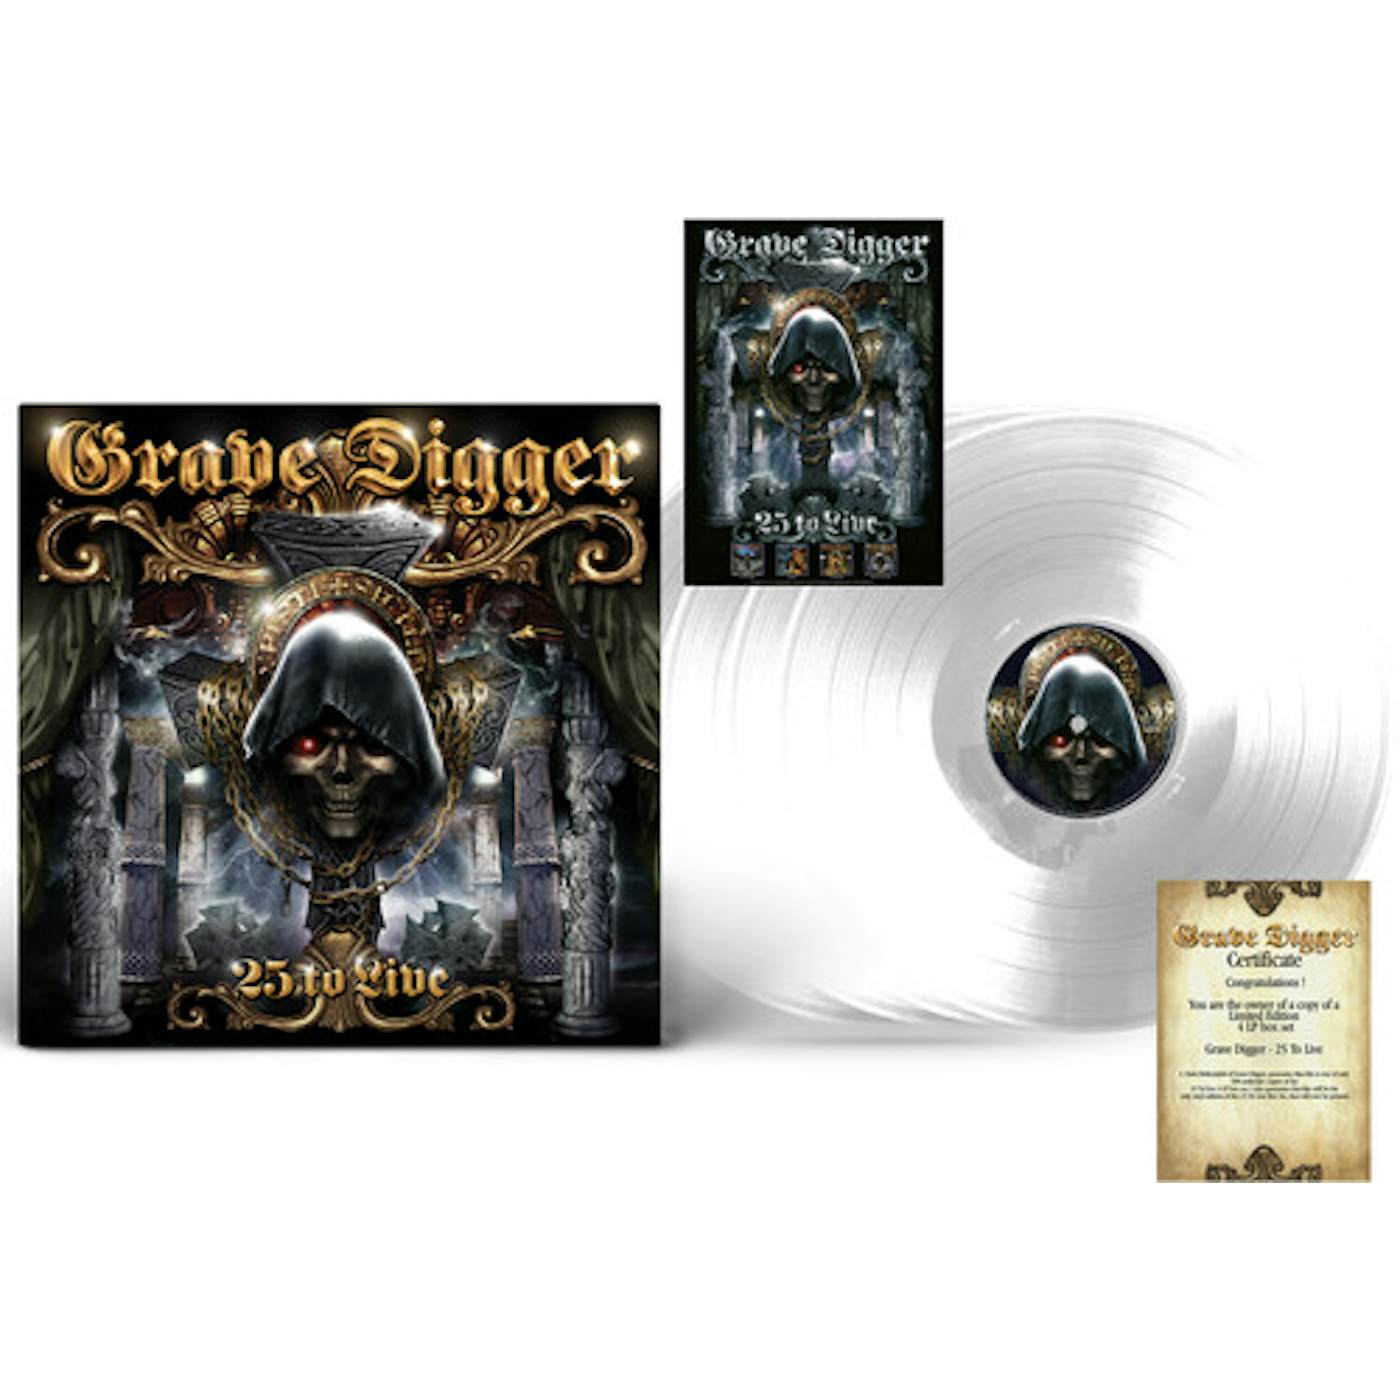 Grave Digger 25 TO LIVE - CRYSTAL CLEAR Vinyl Record